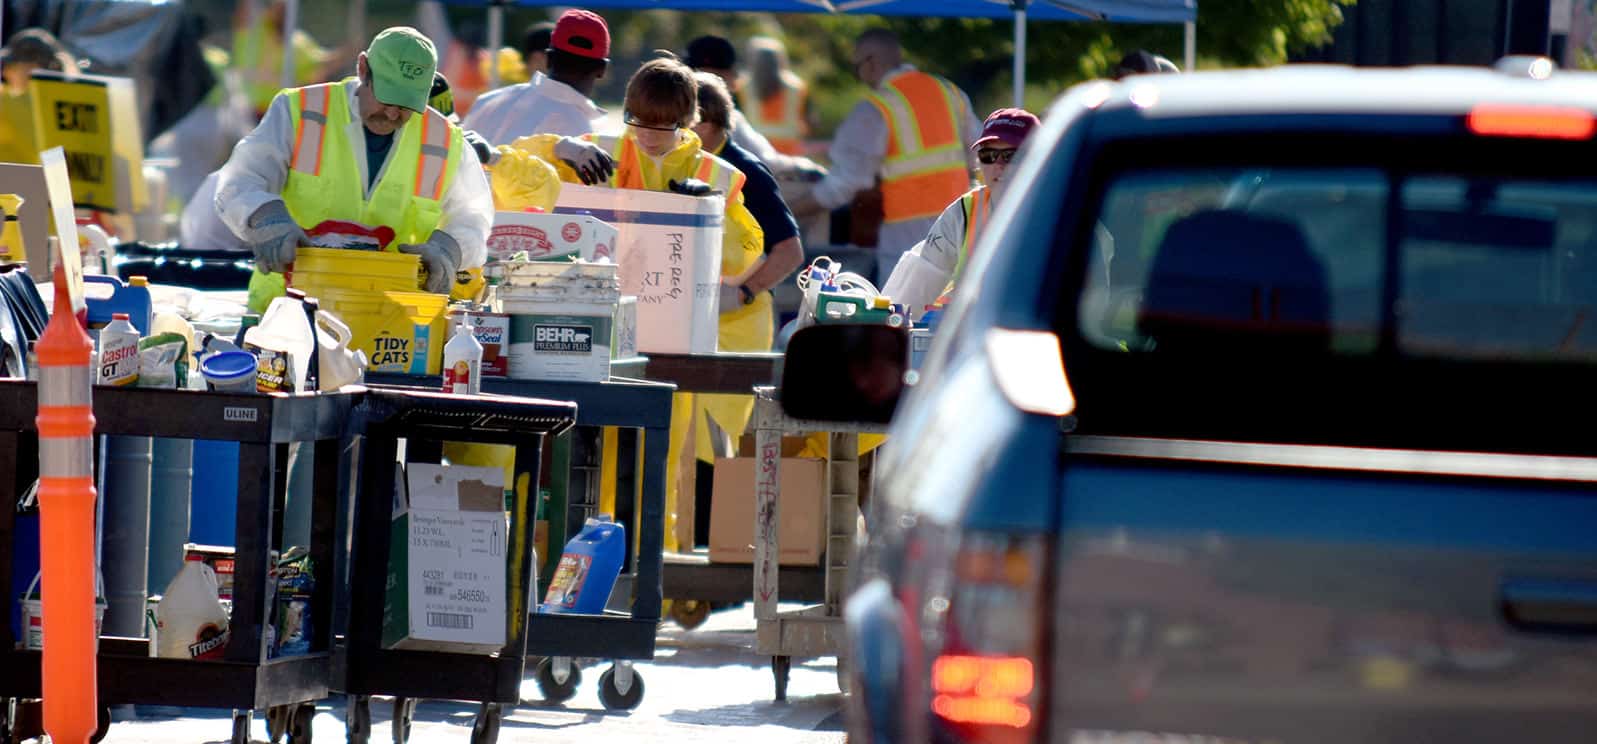 Cars driving through household chemical waste roundup with volunteers